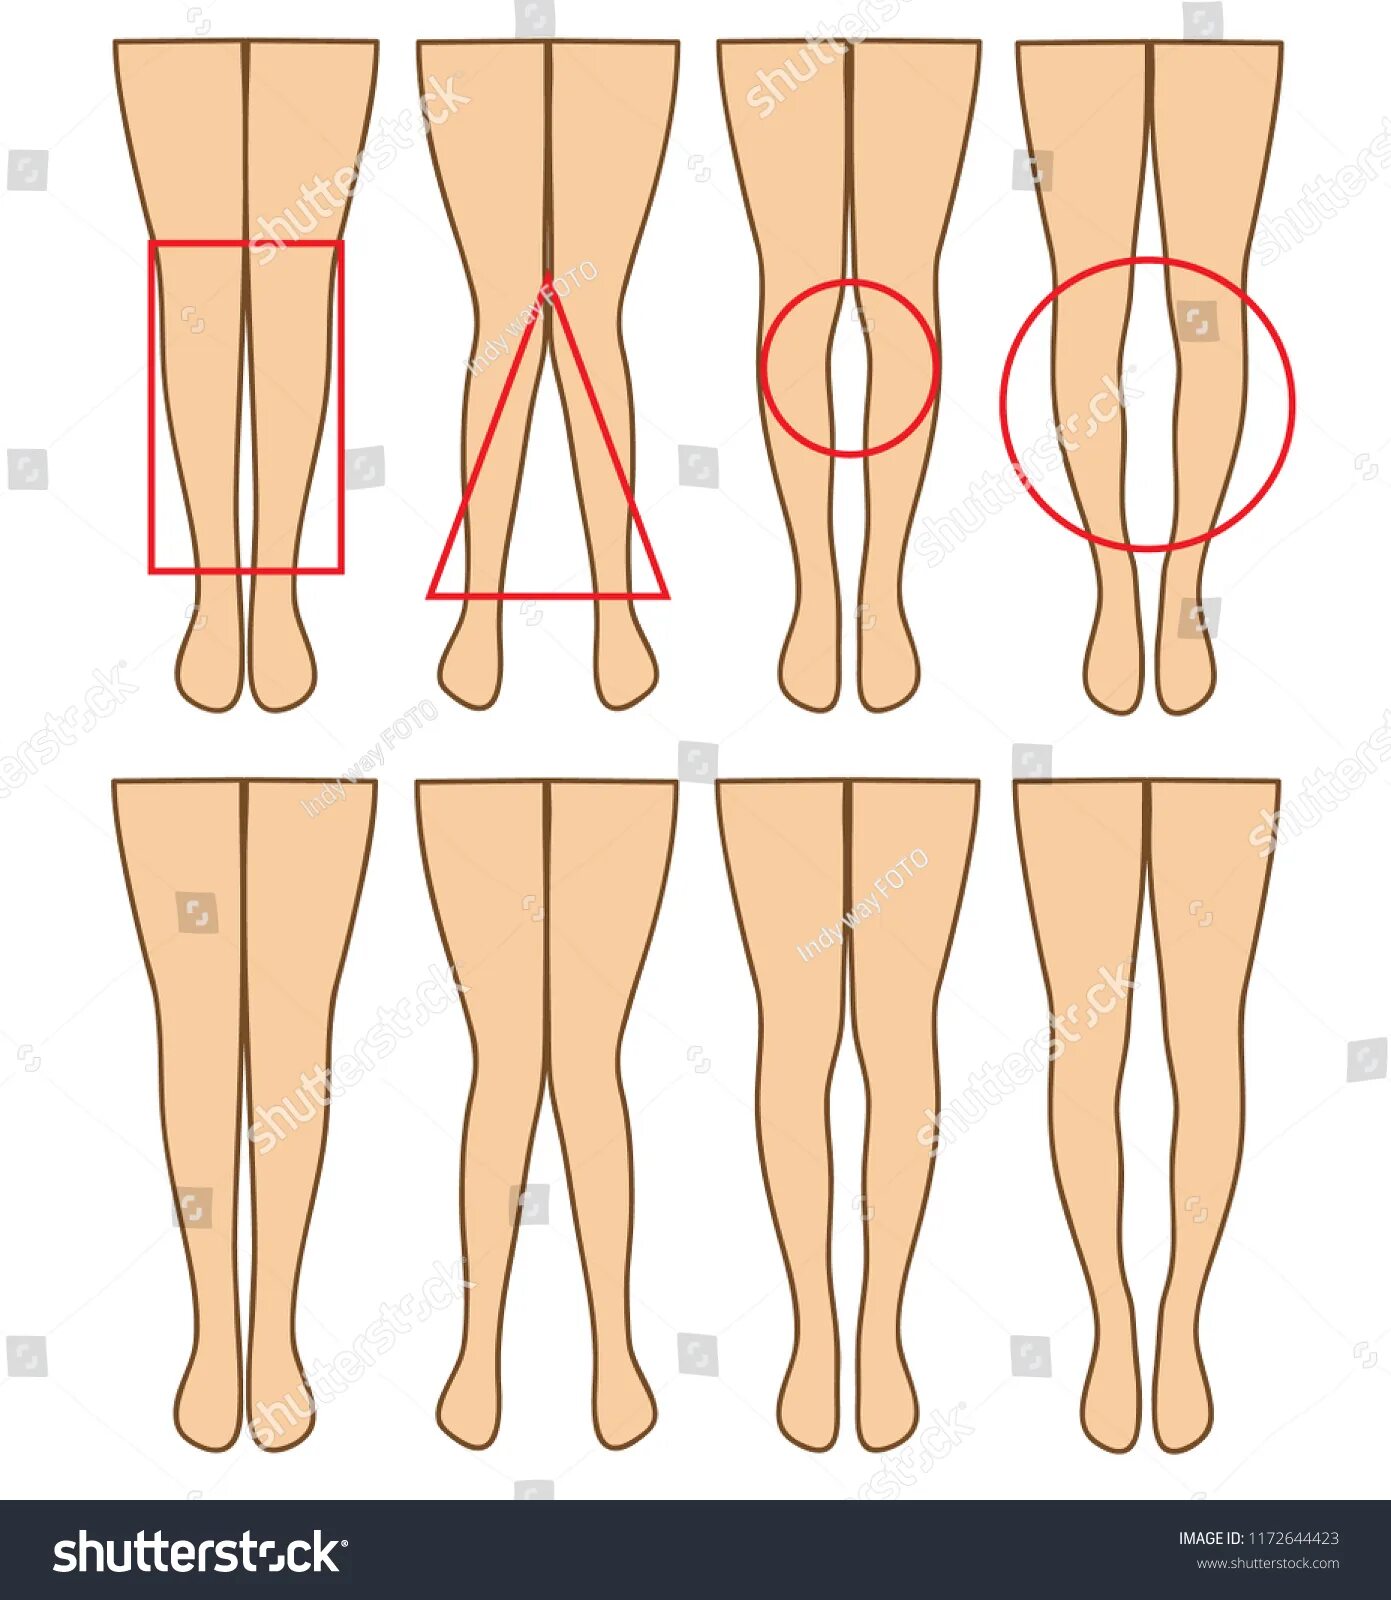 Types of Legs. Types of Legs Hip Replacement. Leg curvature Types. O leg o